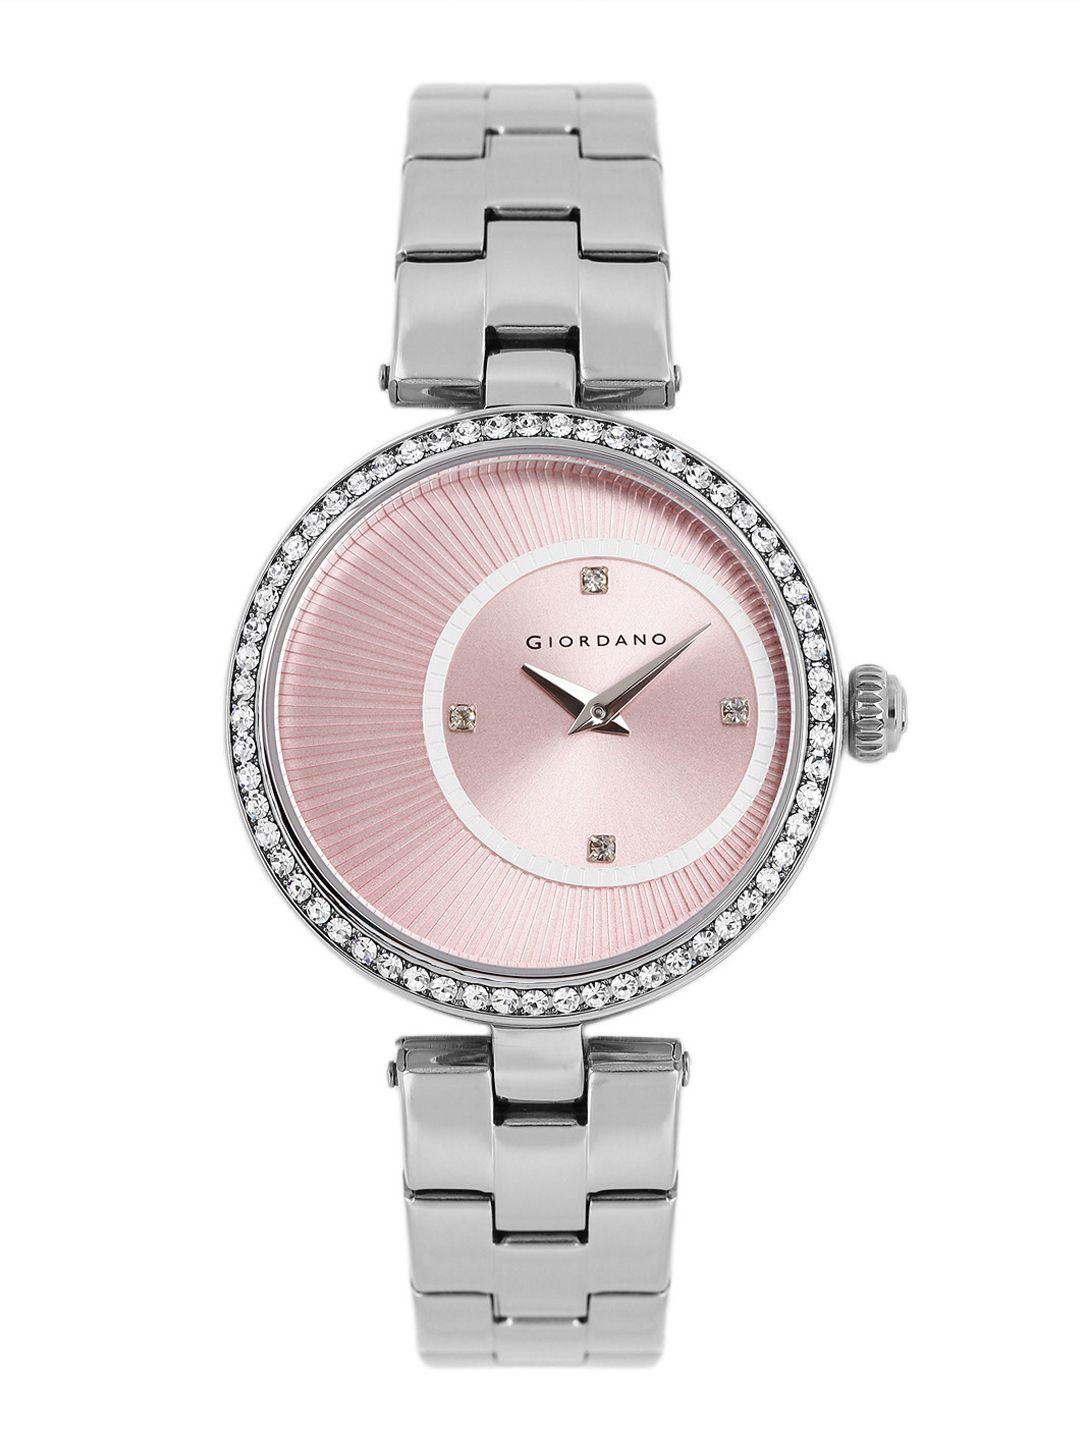 GIORDANO Women Pink Analogue Watch A2056-22 Price in India